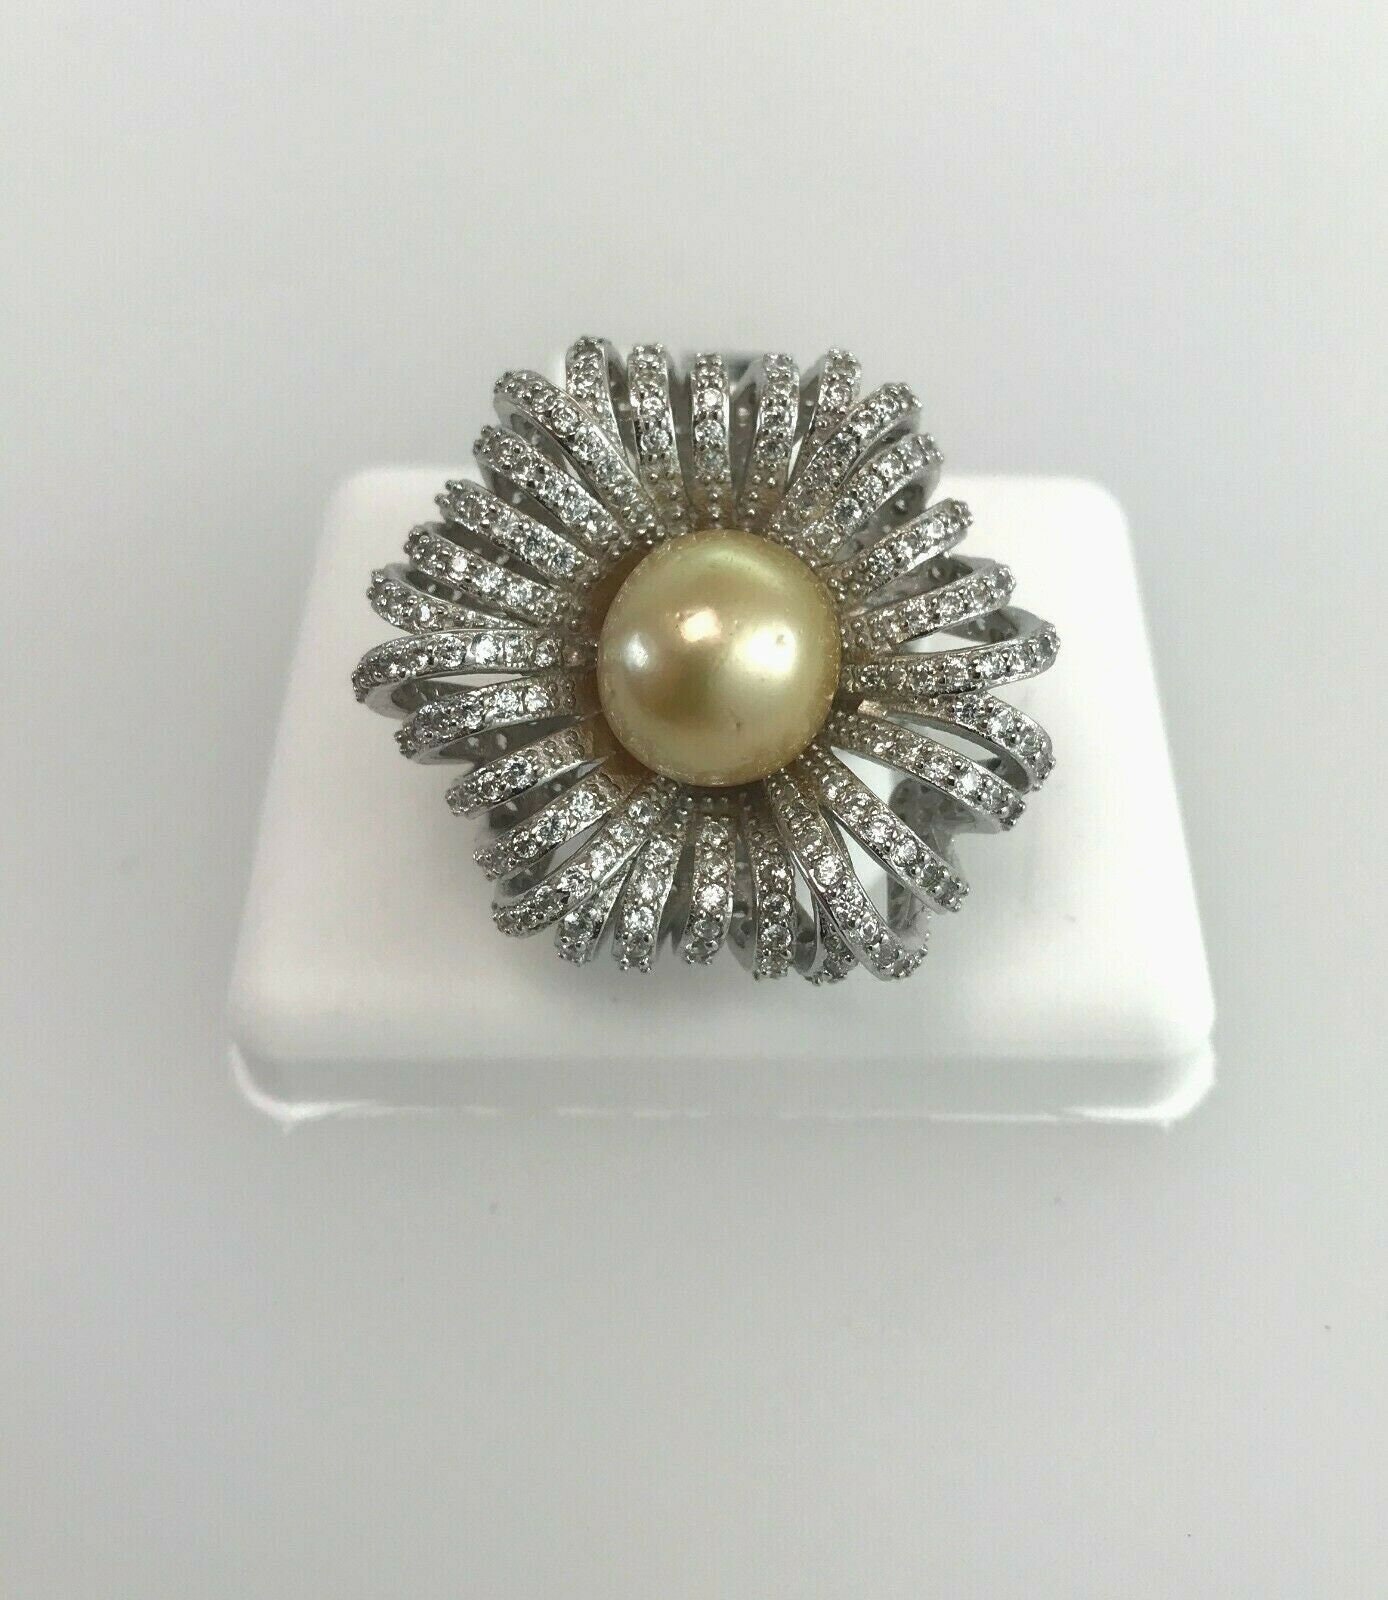 Golden South Sea Cultured Pearl 11mm Natural Color Ring with White Zircon & 925 Silver Rhodium Plated